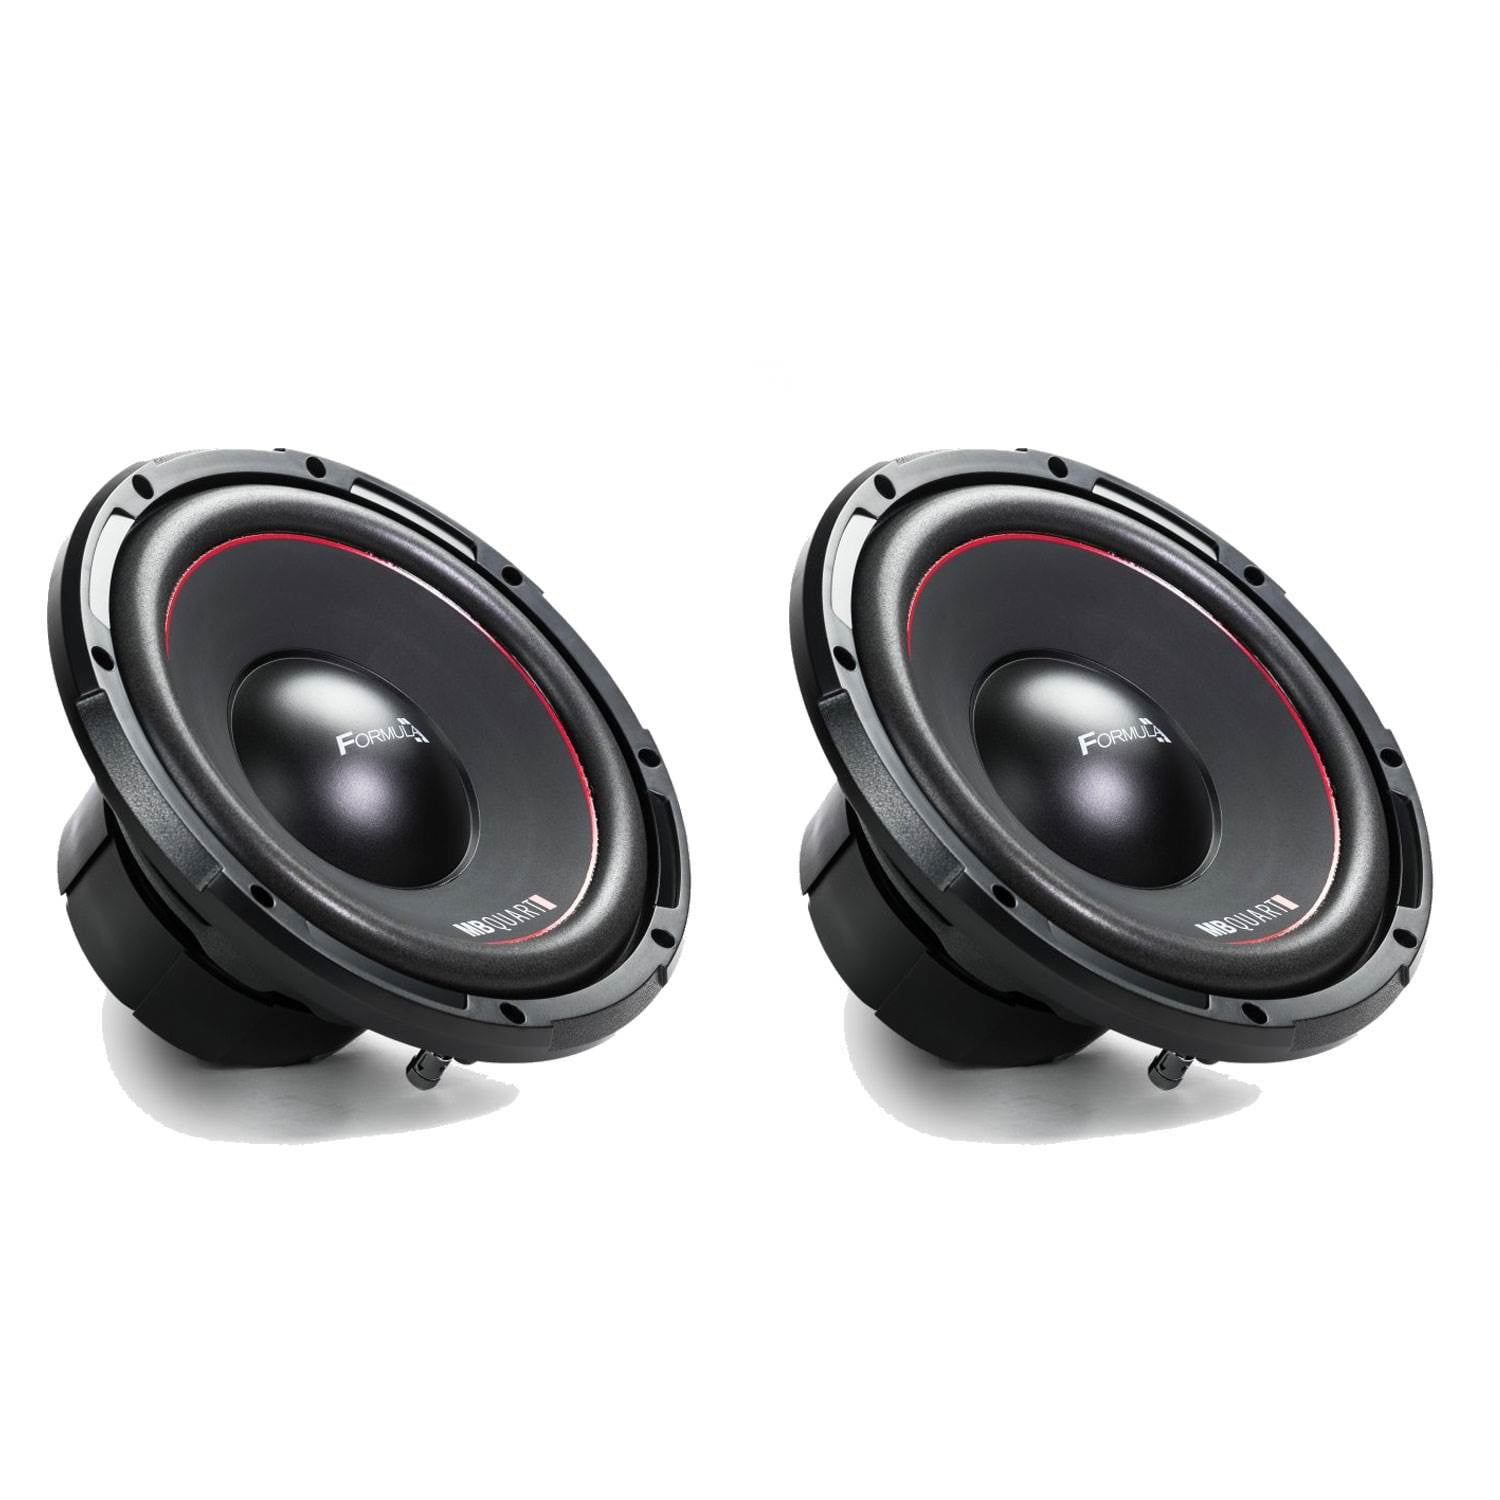 10" Subwoofer Speakers.Car Audio Sound.woofers.300w.4ohm.BASS Pair.10in 2 NEW 